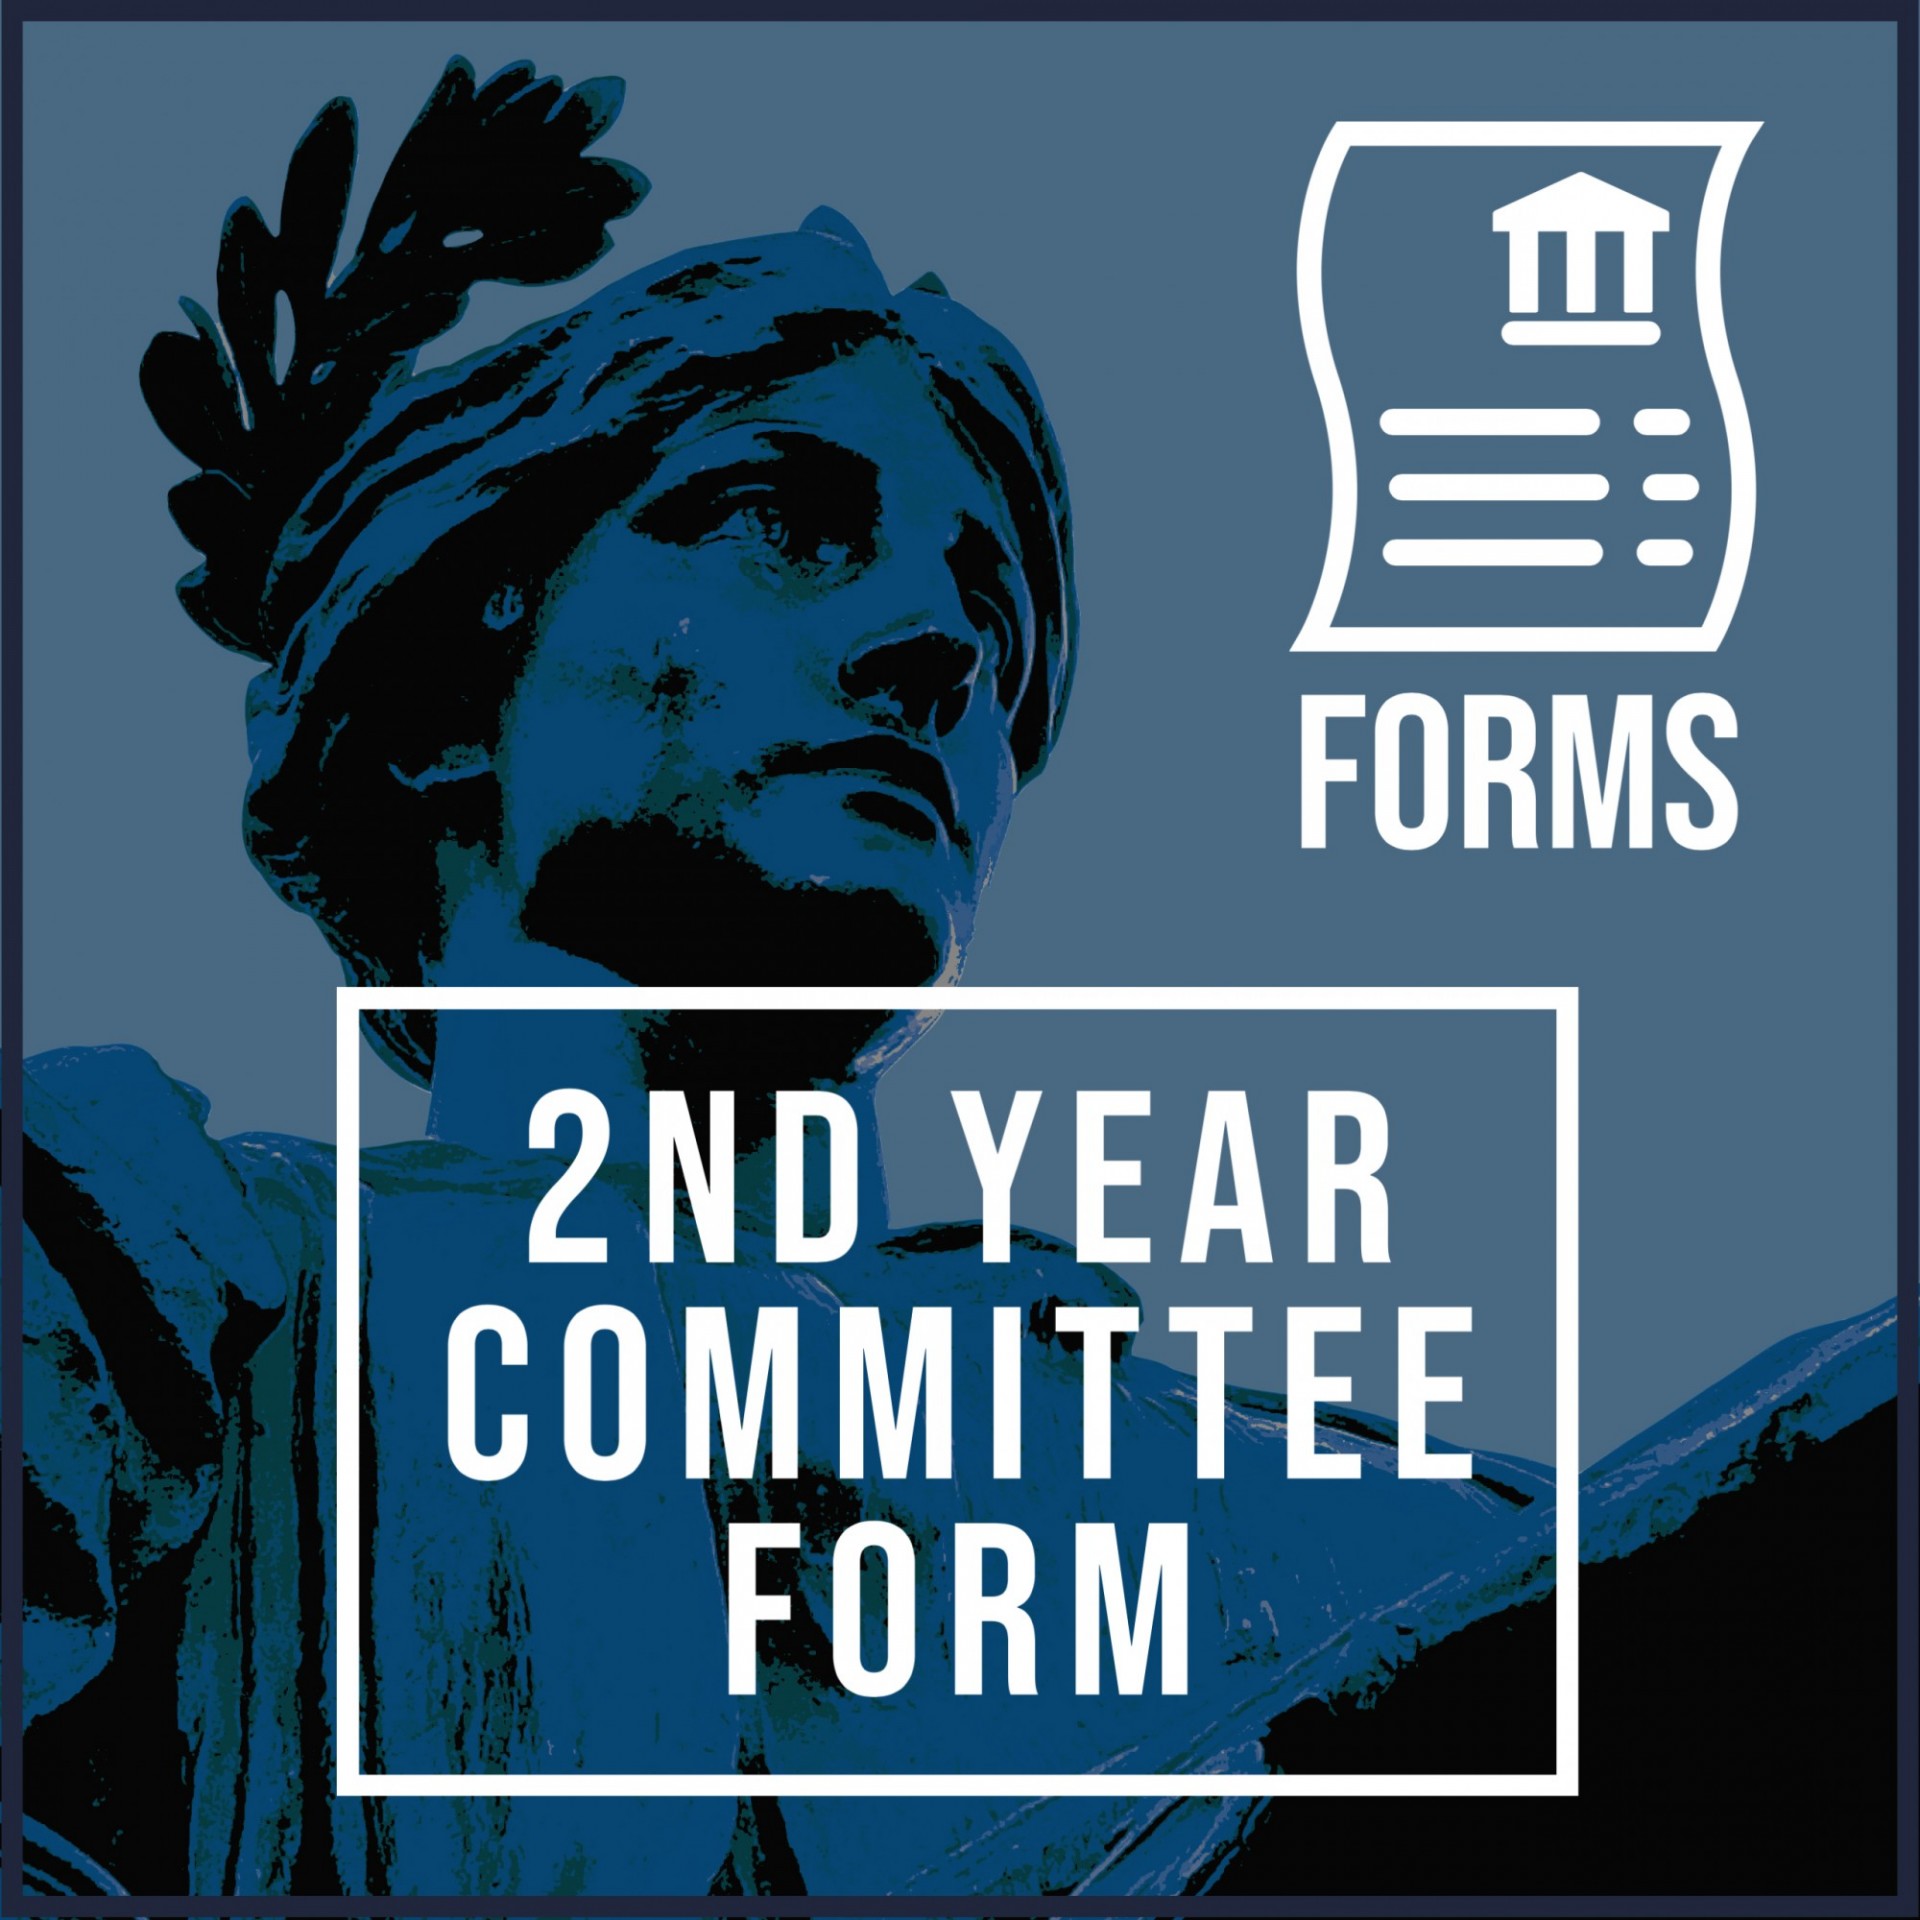 Forms Icon: Second Year Committee Form